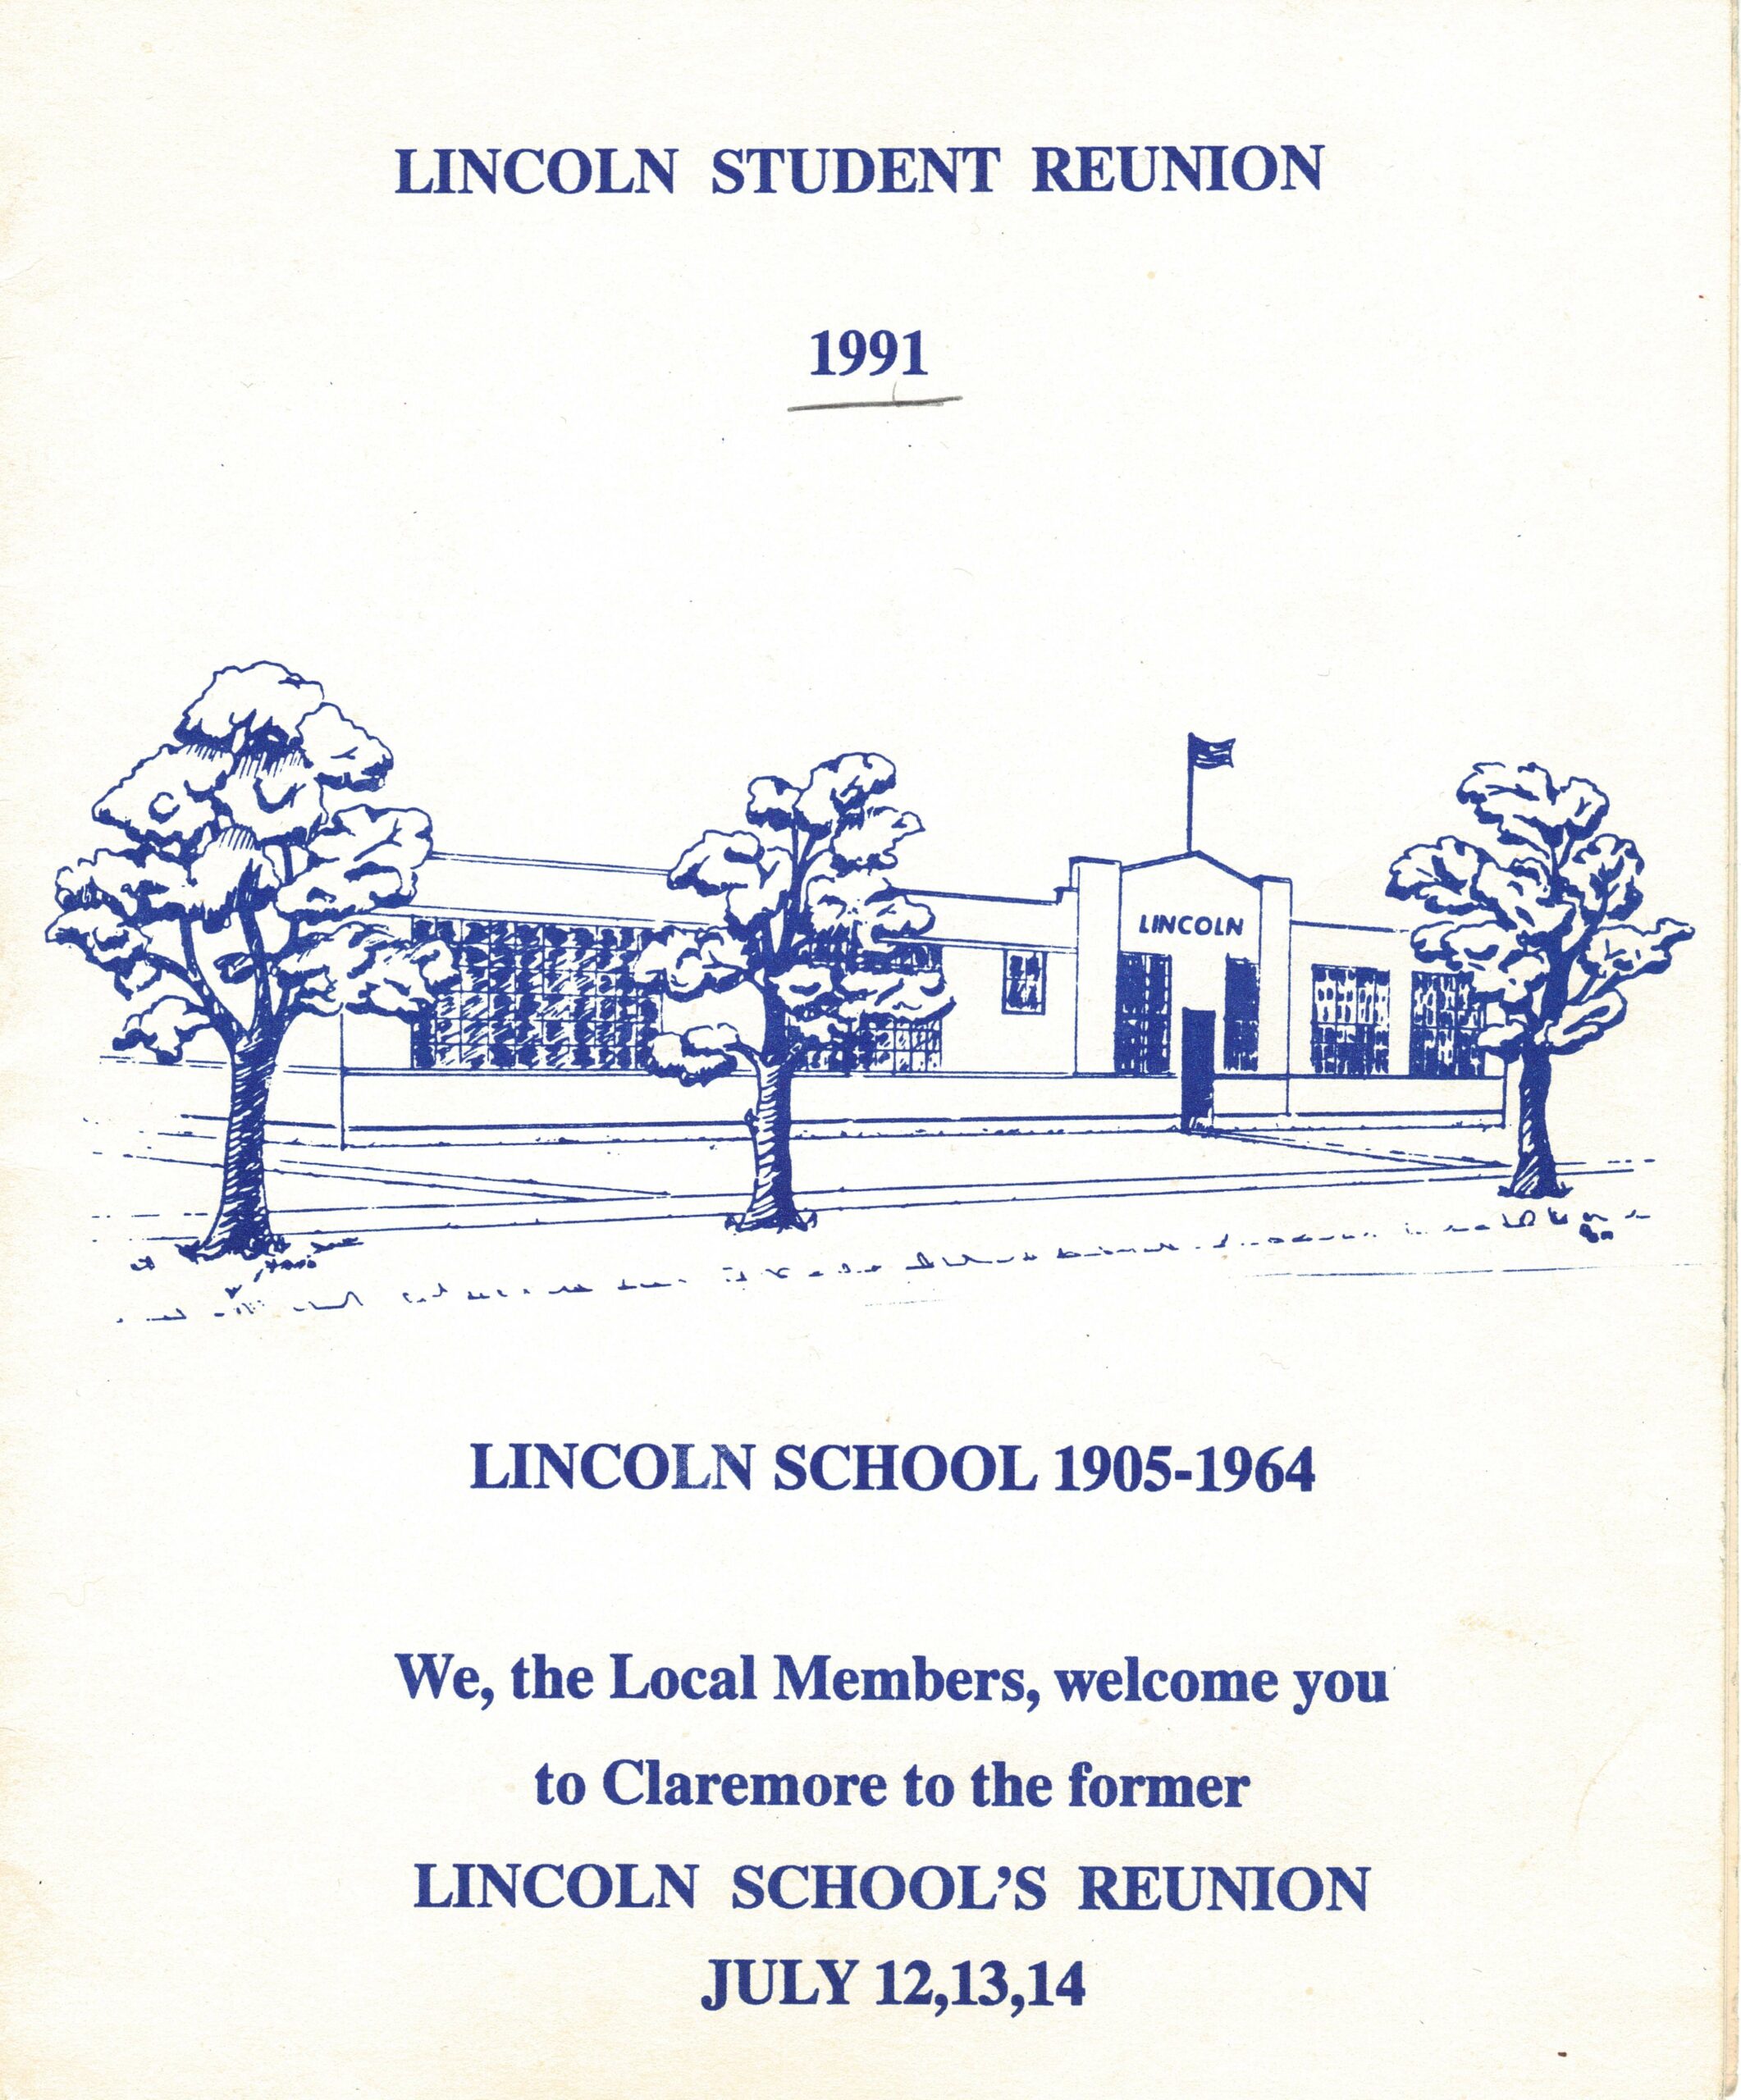 Front page of the 1991 Lincoln student reunion pamphlet with details and blue ink drawing of Lincoln school building with trees.